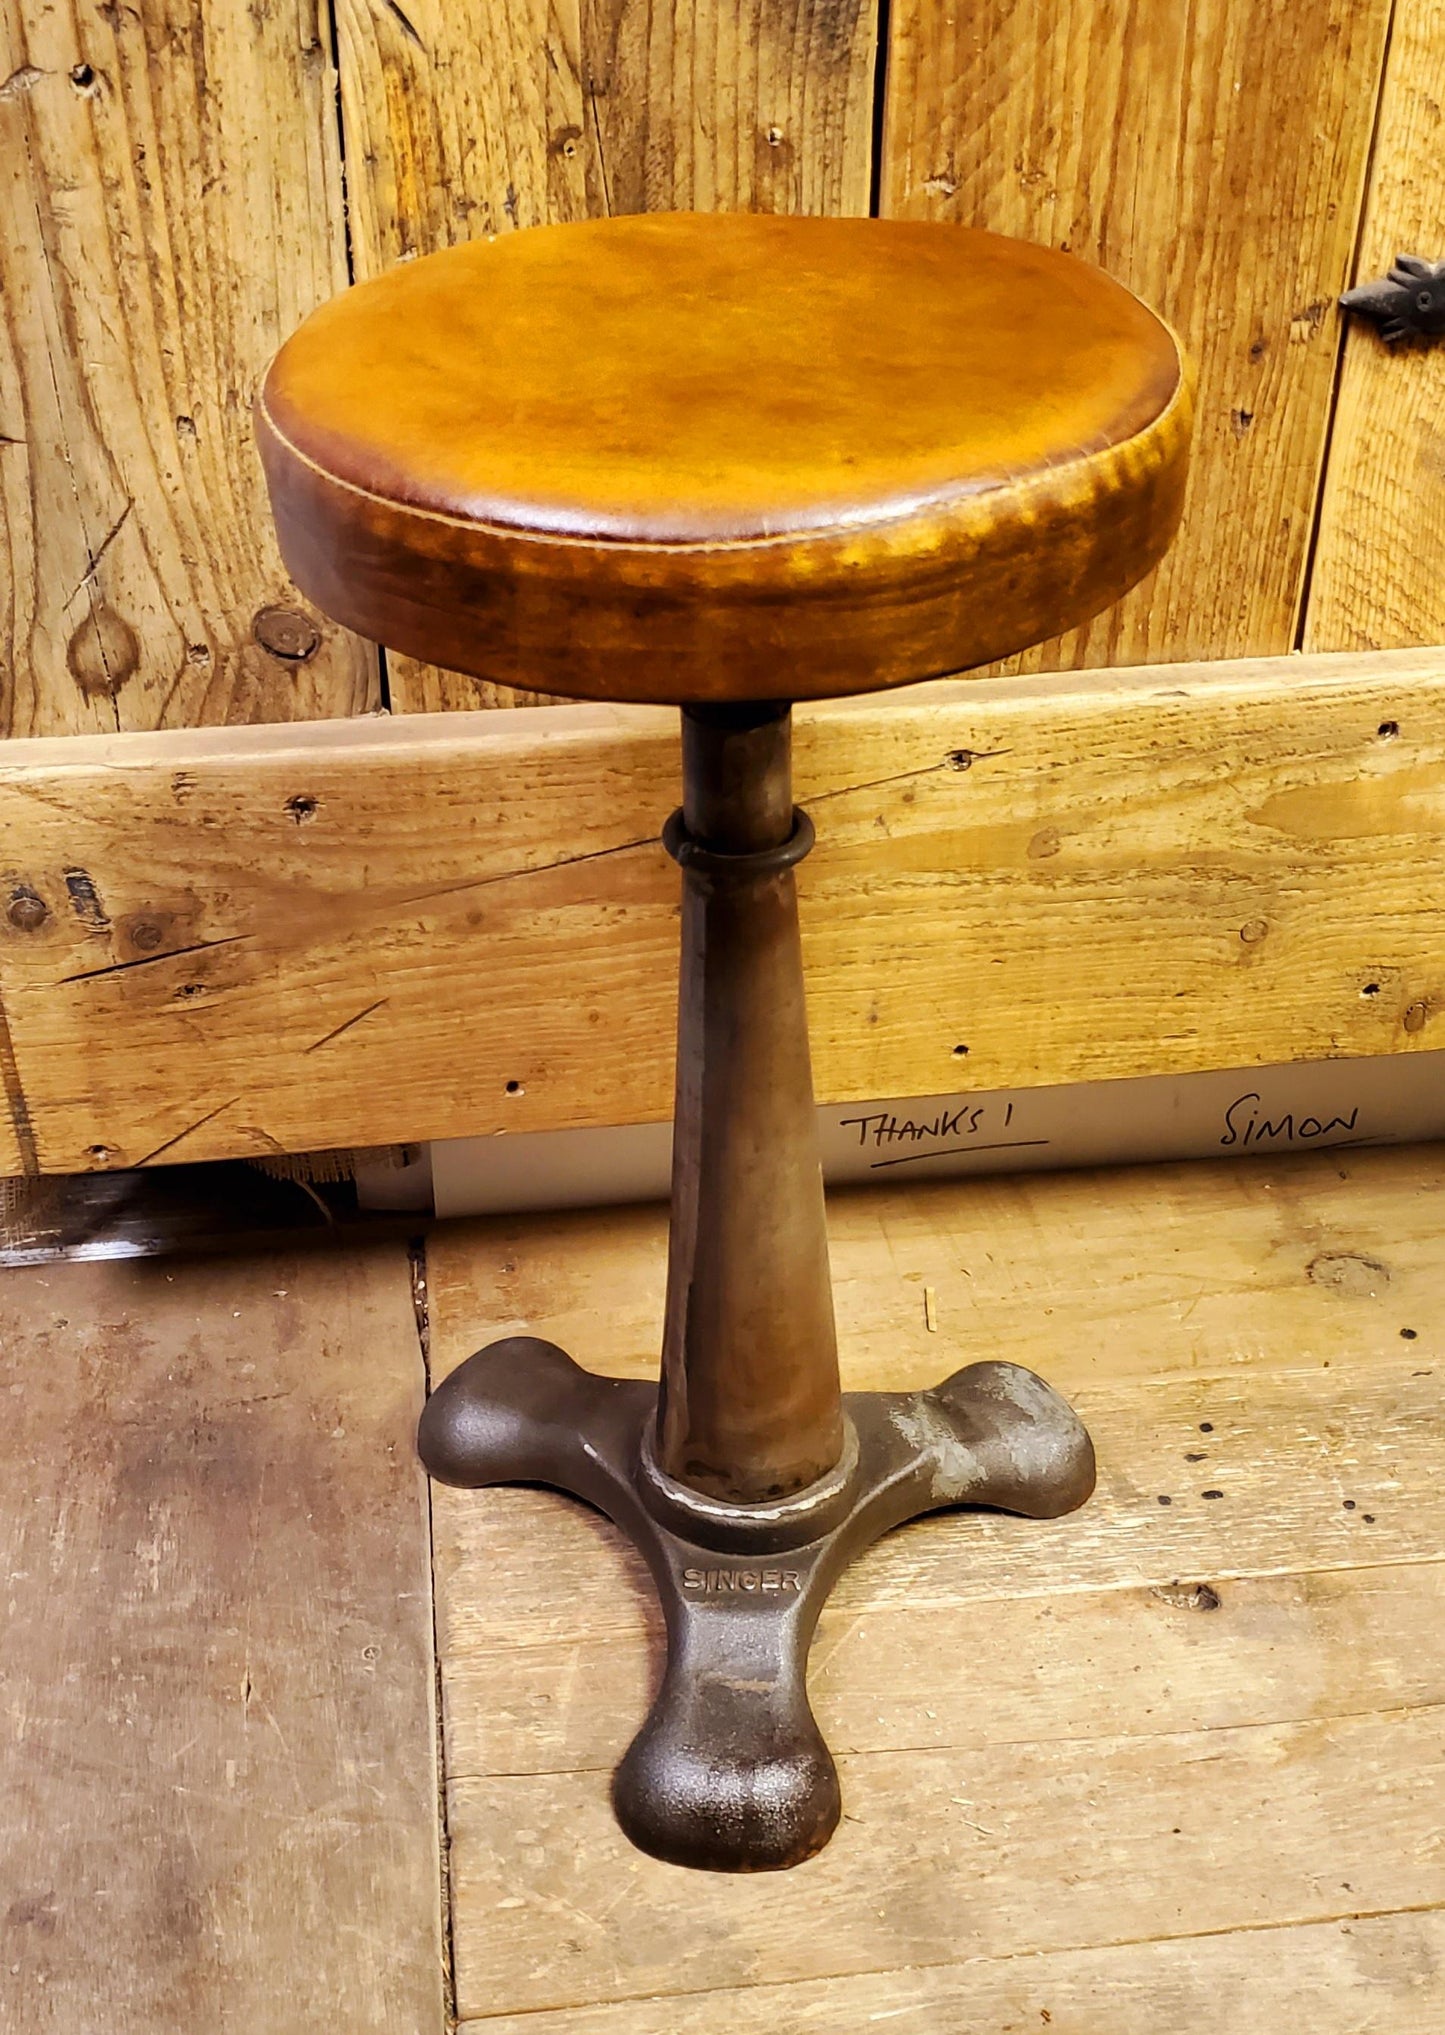 The 'Singer' Adjustable height Stool with Leather Seat top